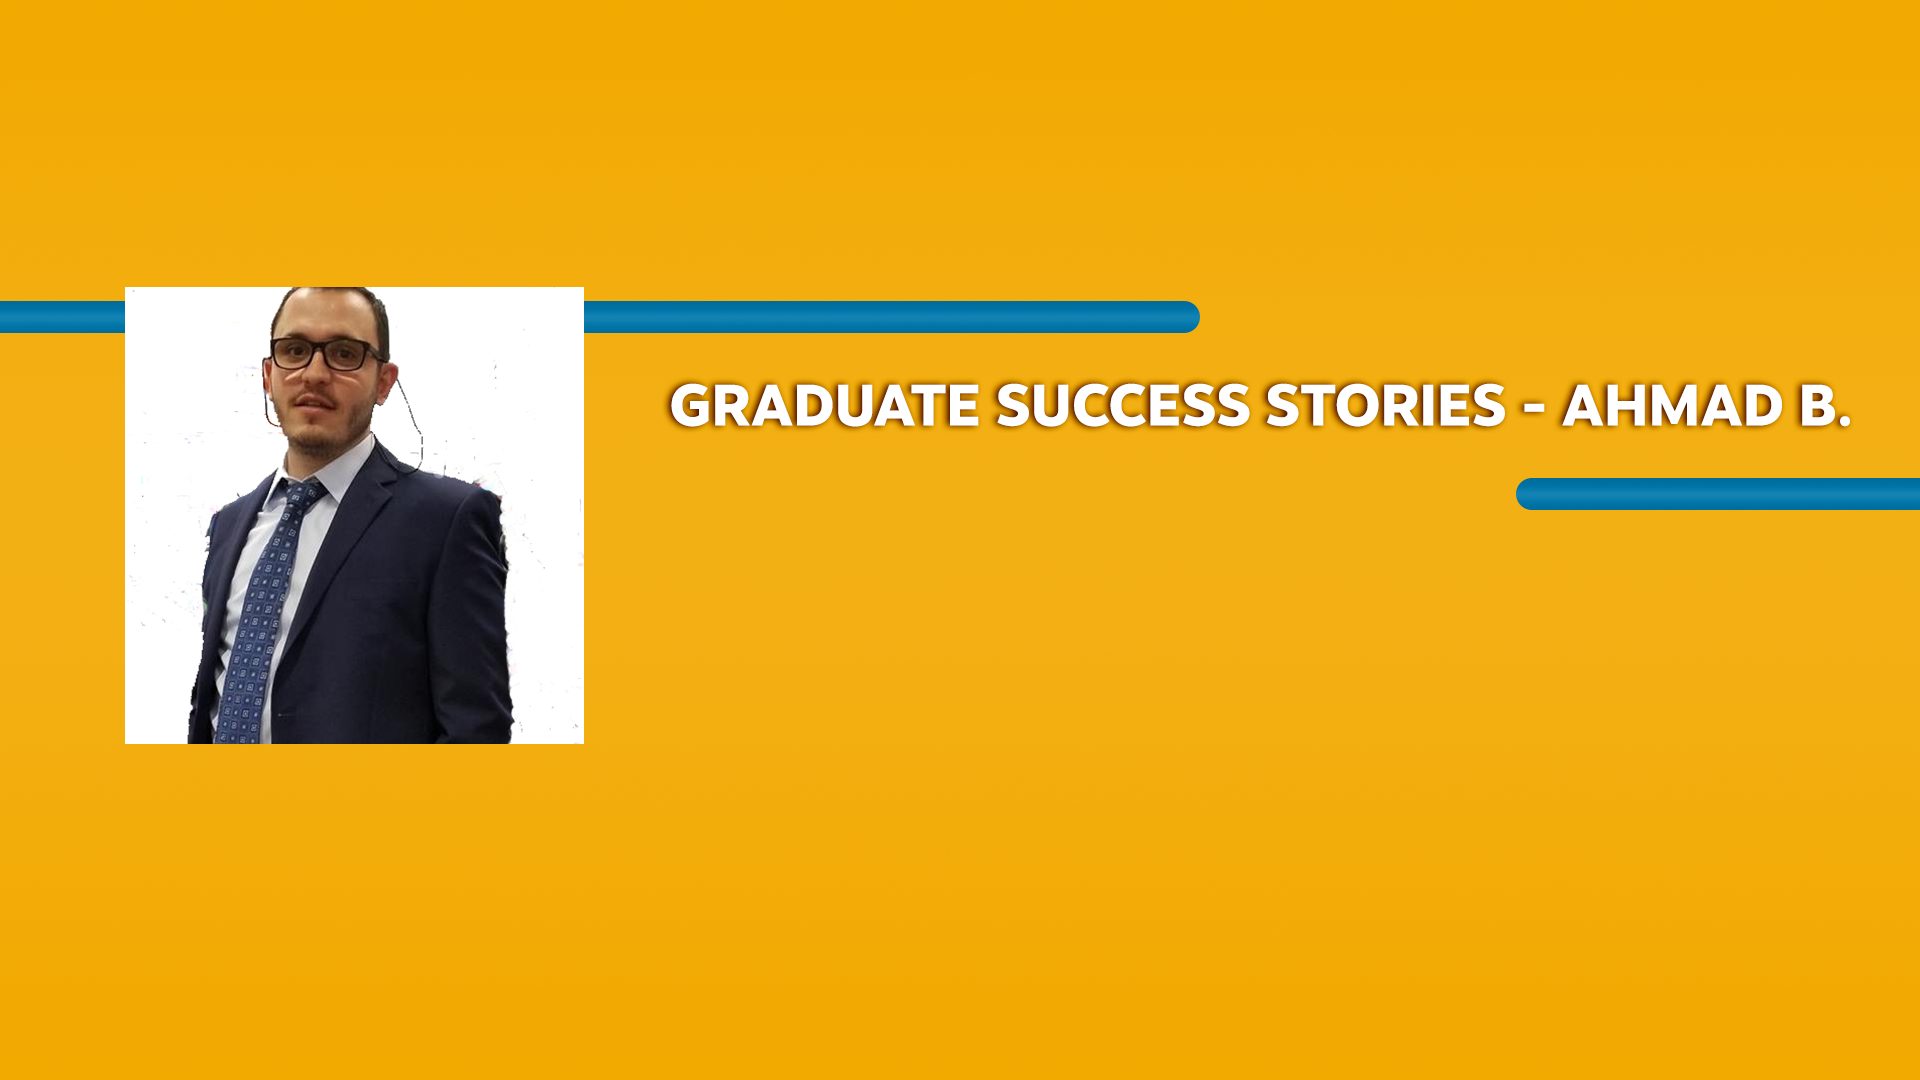 Orange rectangle with a picture of a man wearing a suit and Graduate Success Stories - Ahmad B. text in white font